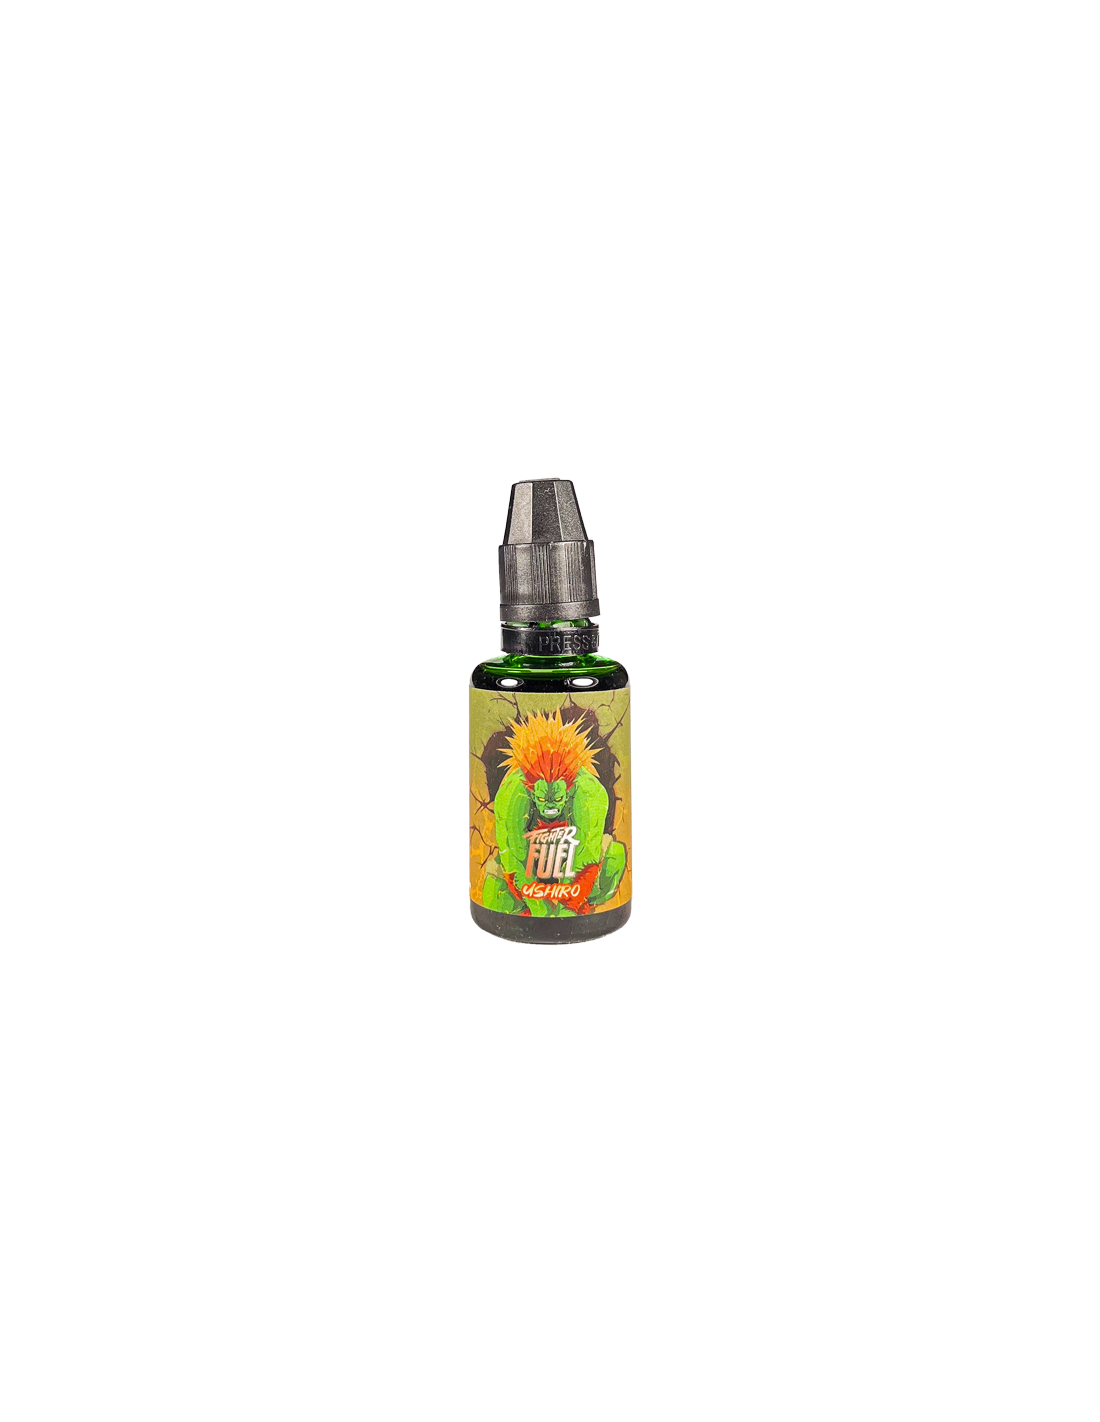 Maison Fuel France Ushiro Fighter Fuel Aroma Concentrato 30ml Ananas Litchi Ice